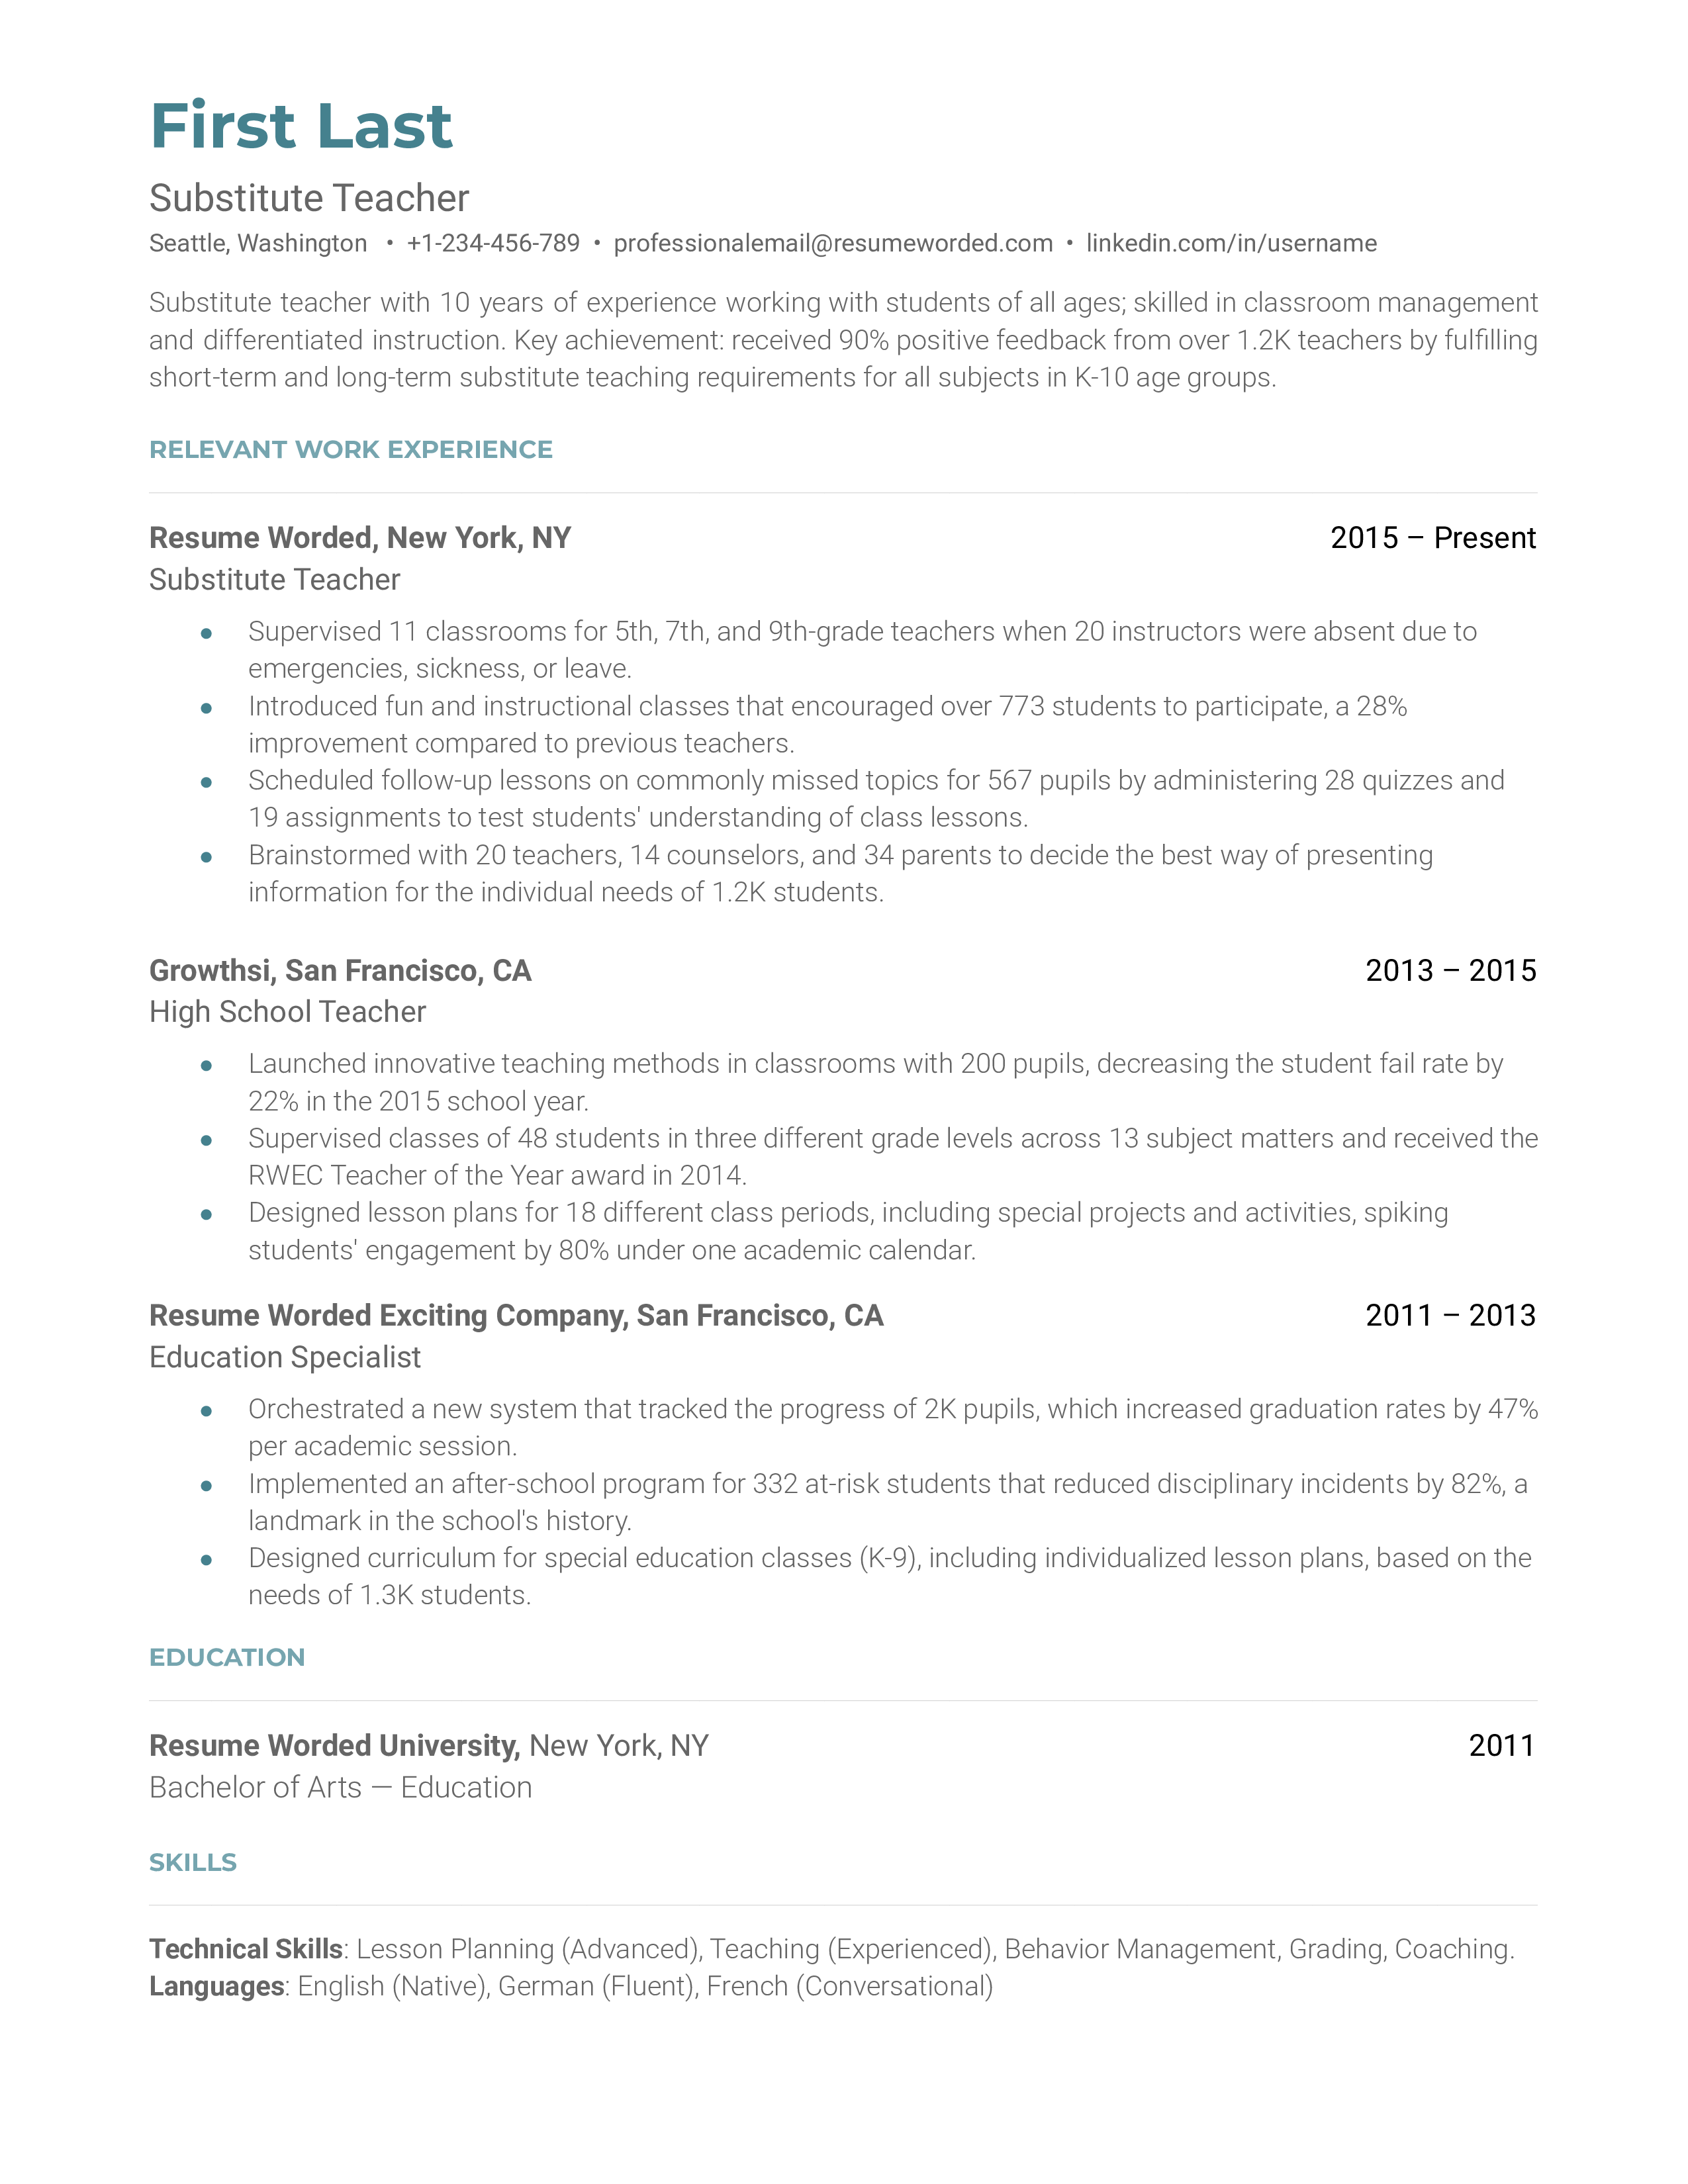 A substitute teacher resume sample that highlights the applicant’s range and positive recognition from fellow teachers.